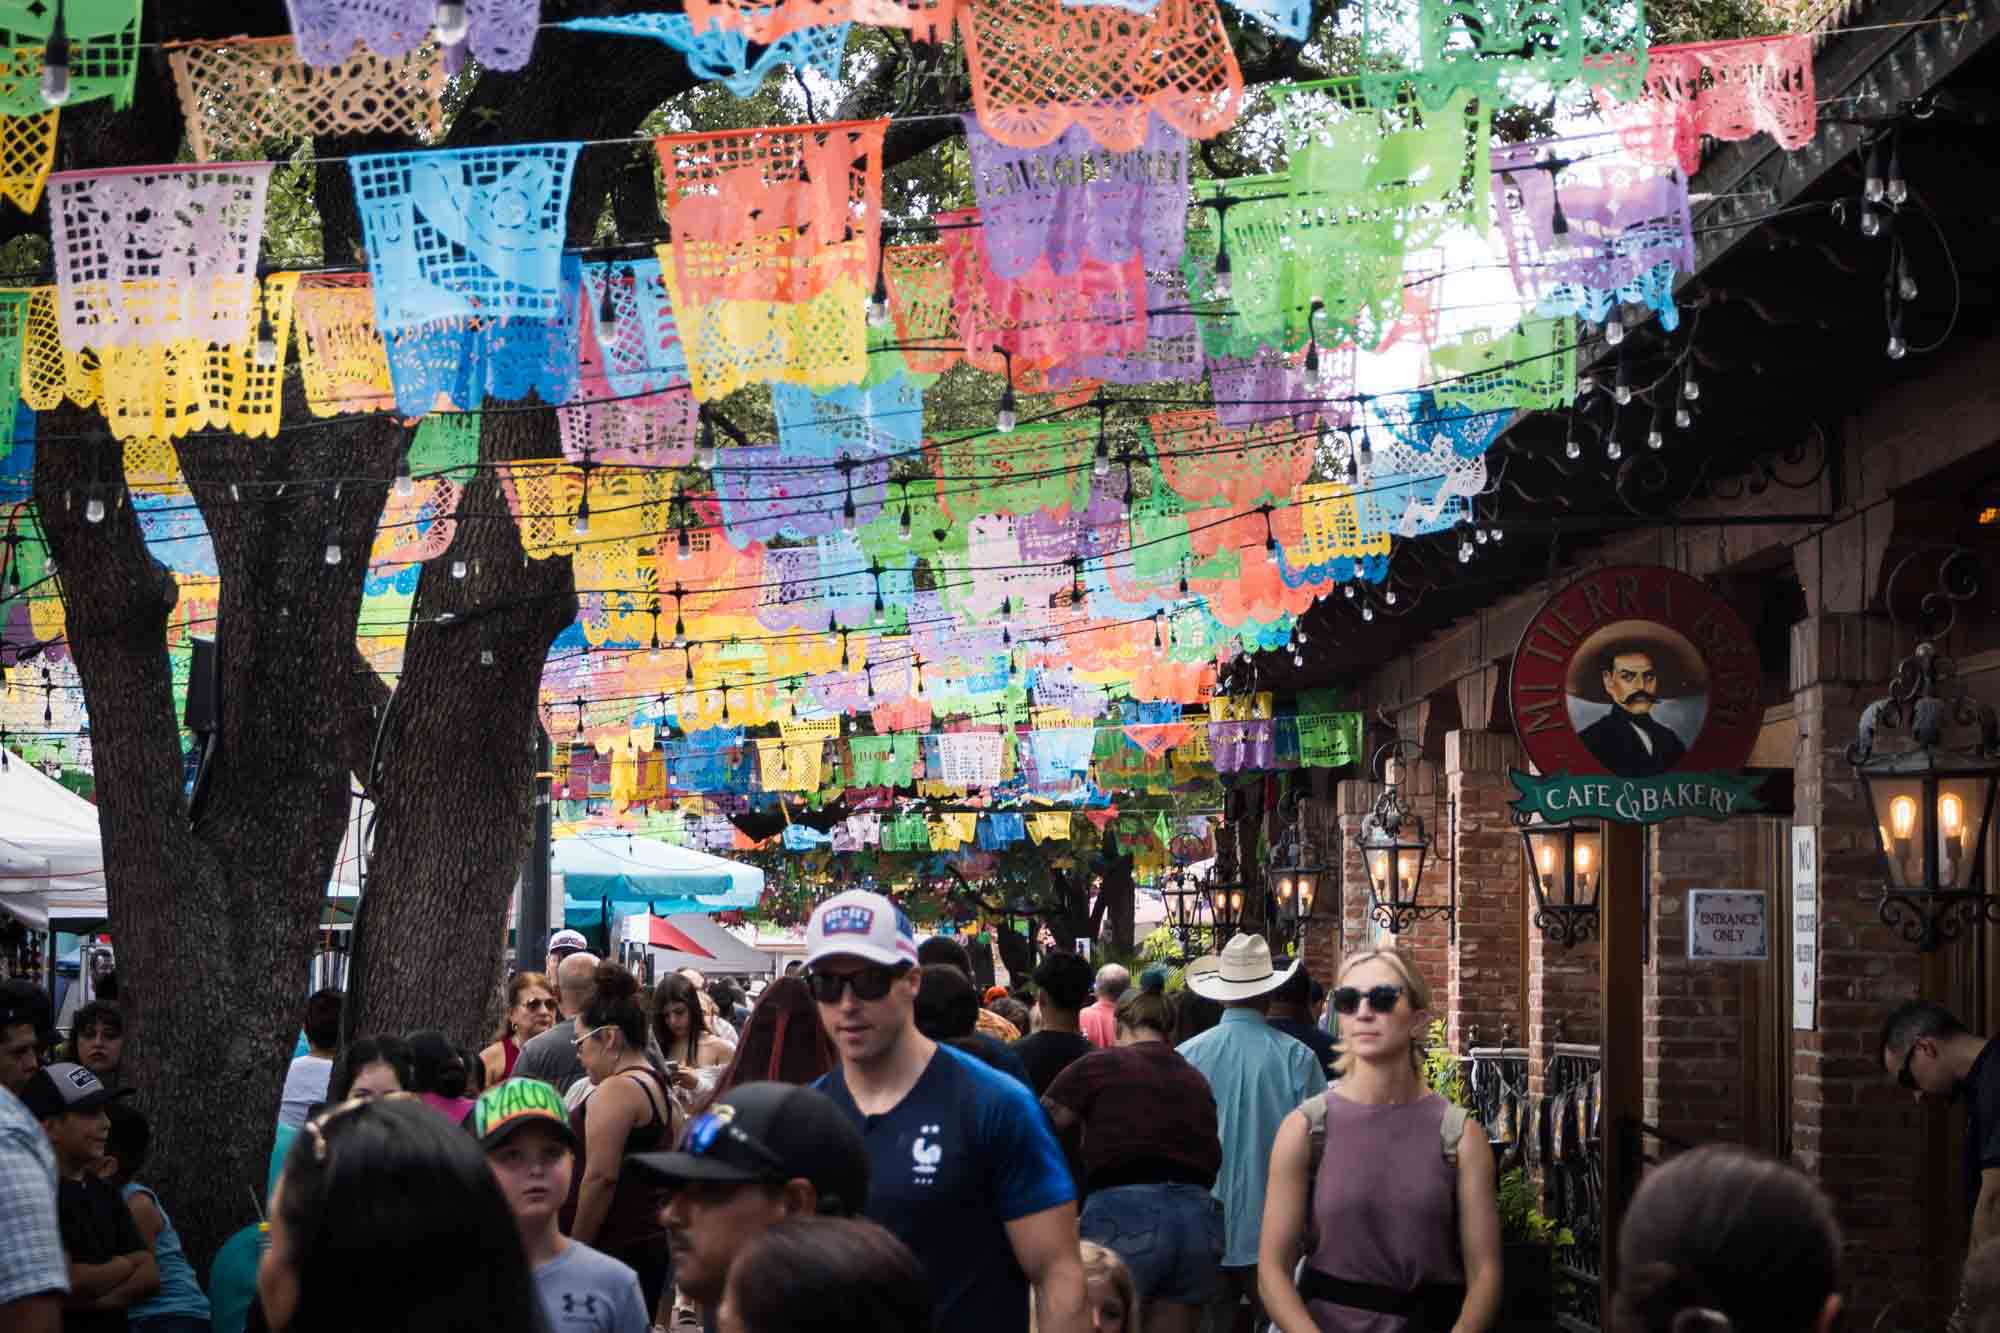 Colorful papel picabo hanging above crowds at the Mercado in San Antonio